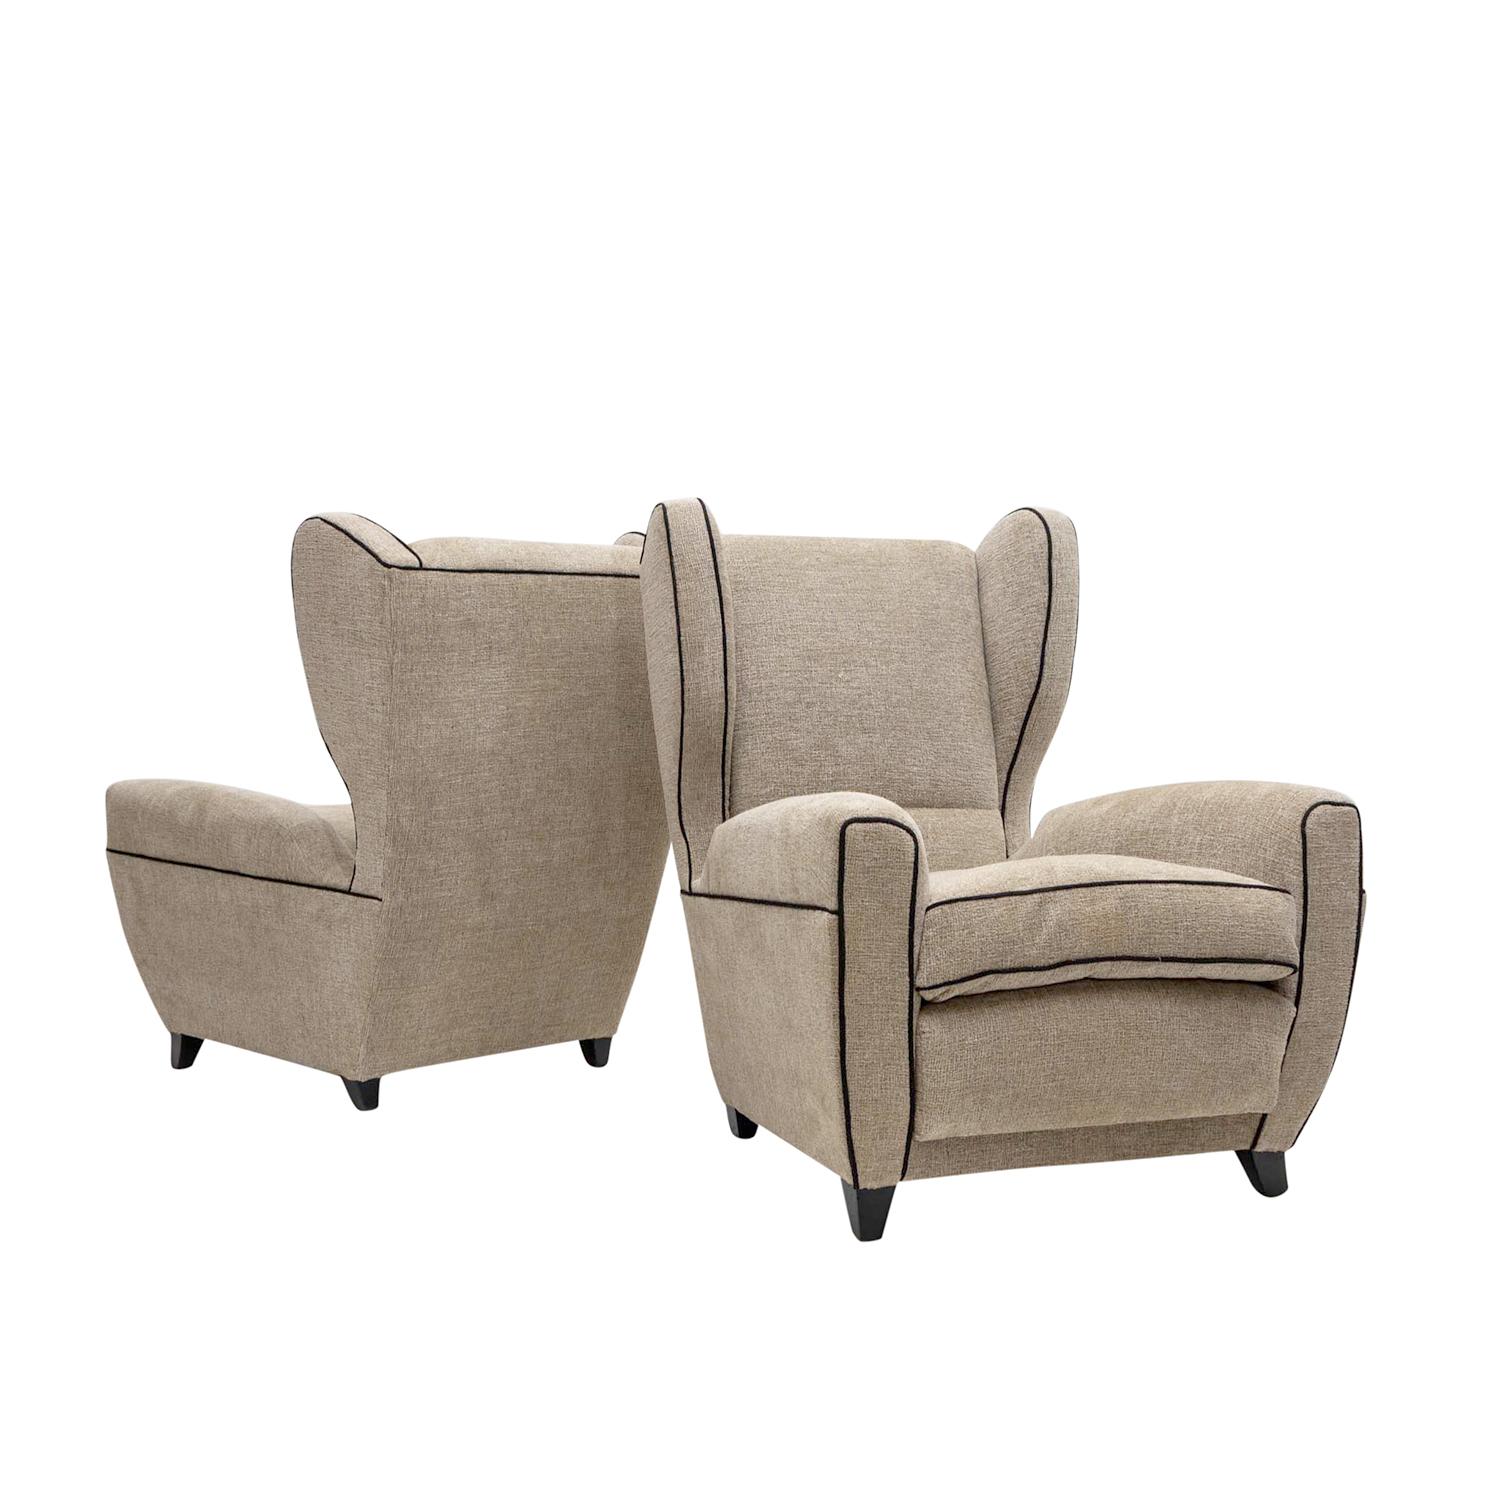 Hand-Crafted 20th Century Grey Italian Pair of Lounge, Wingback Chairs by Melchiorre Bega For Sale